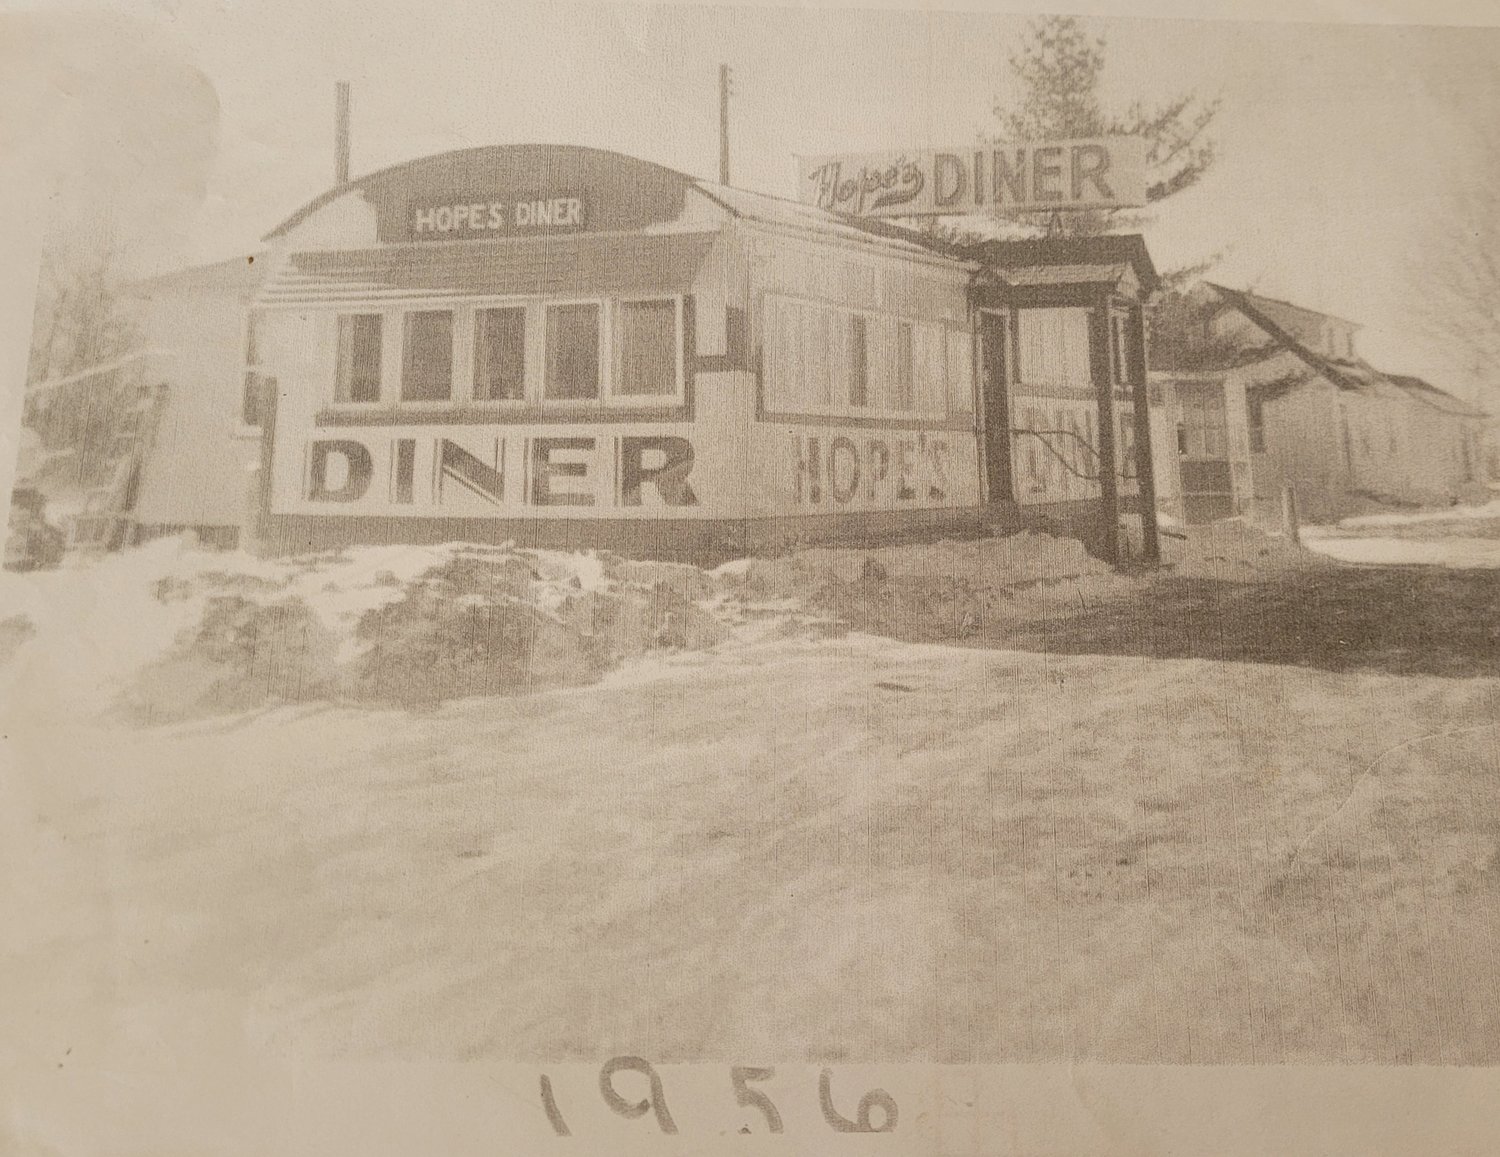 Sally was working as a waitress in her family’s diner more than 60 years ago when she first met her husband. Her family owned Hope’s Diner, on Route 6 in Foster, and her future husband stopped in to order Sally’s mother’s beef stew. This photo shows how the diner appeared in the mid-1950s, just before Sally met Earl over a hot bowl of stew.